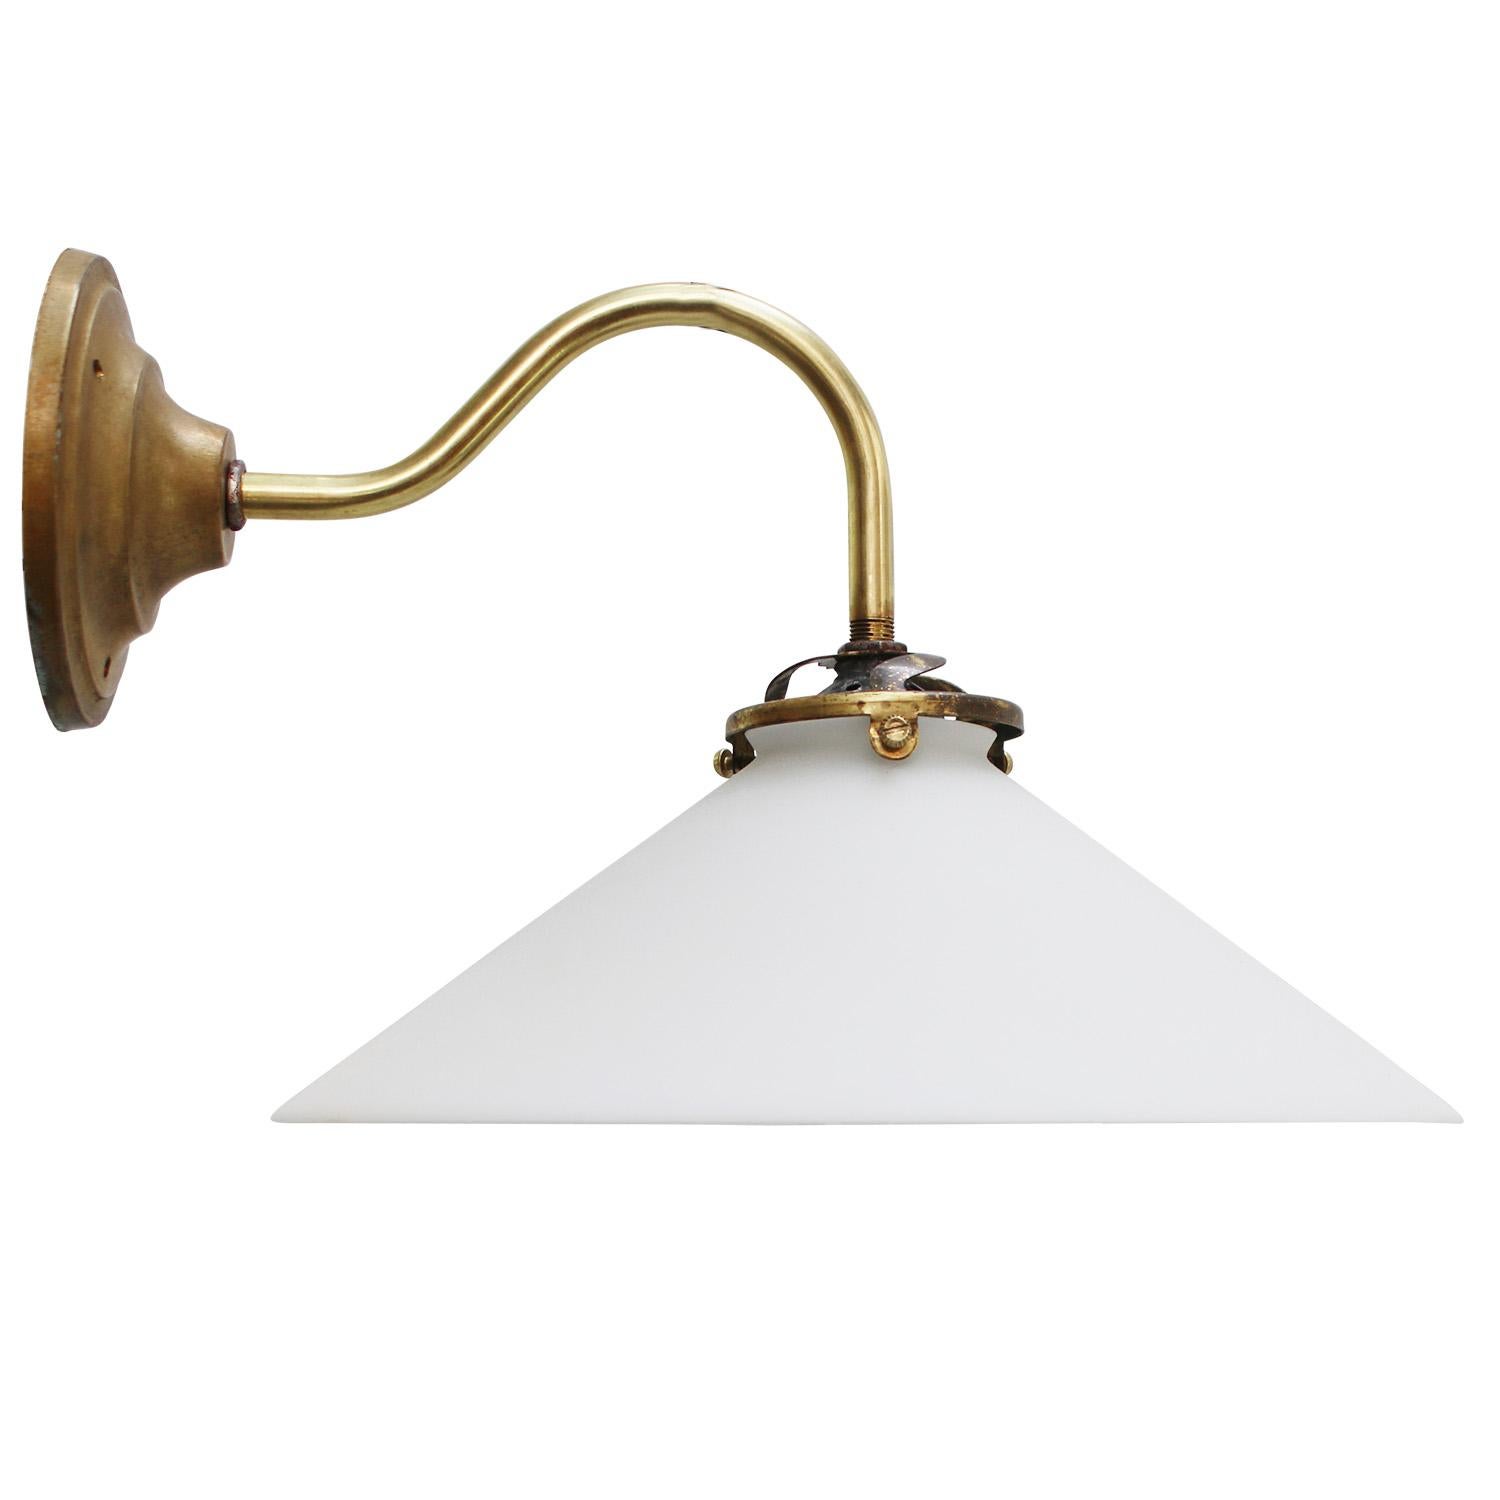 French wall lamp
White opaline shade
Brass wall piece and arm

diameter brass wall mount: 10 cm, 3 holes to secure

Weight: 0.30 kg / 0.7 lb

Priced per individual item. All lamps have been made suitable by international standards for incandescent